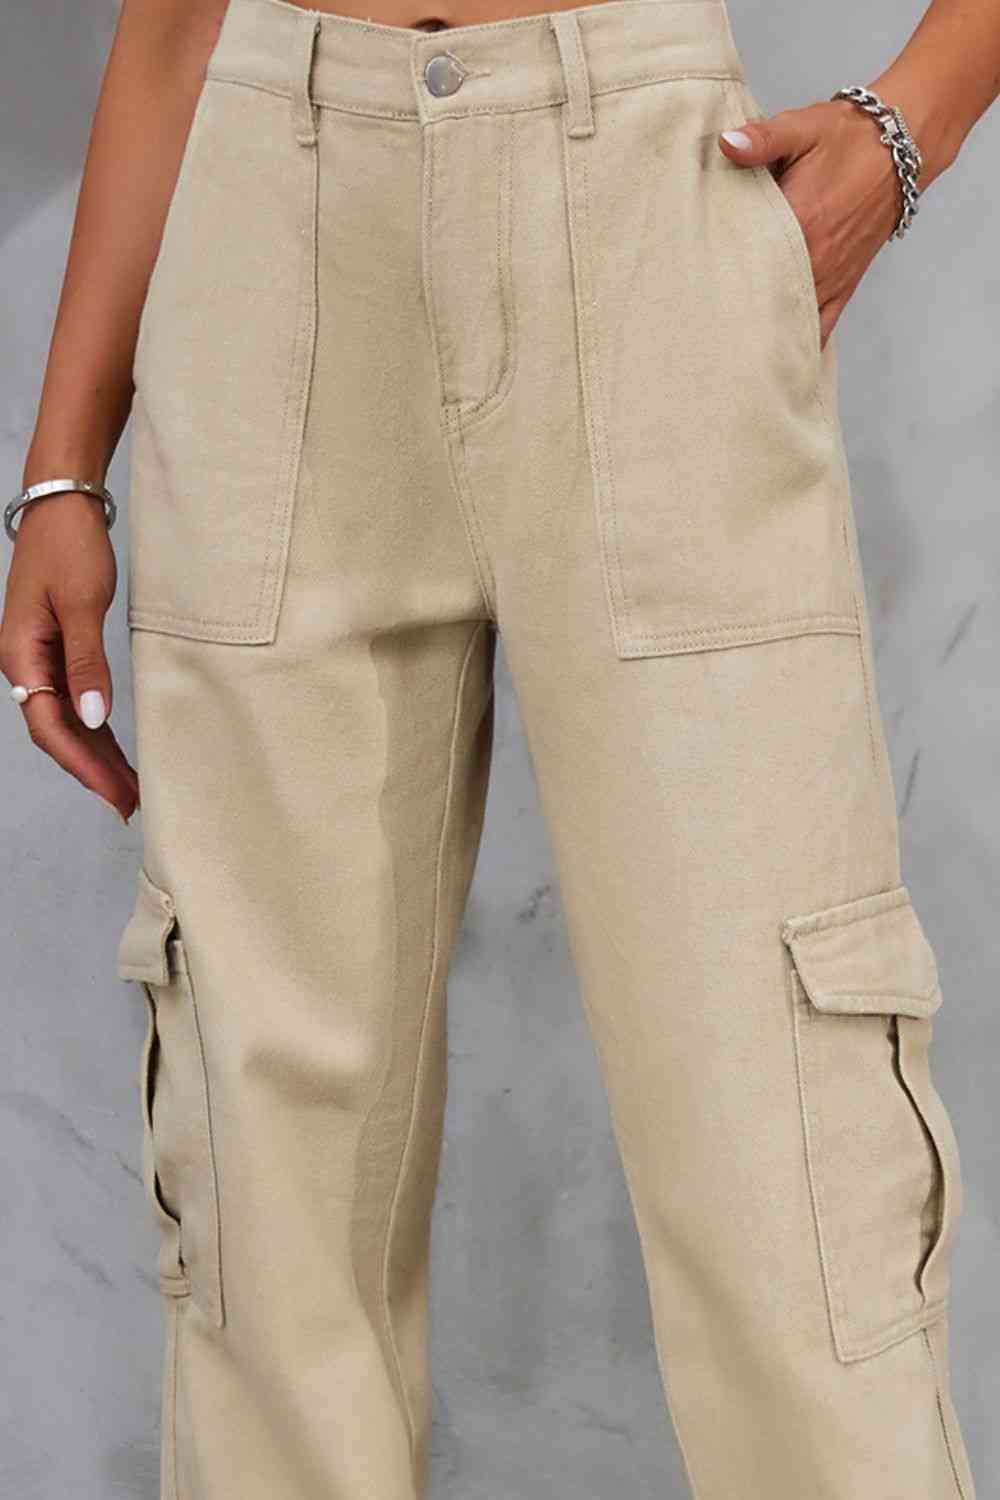 Rosy Brown Buttoned High Waist Jeans with Pockets Denim